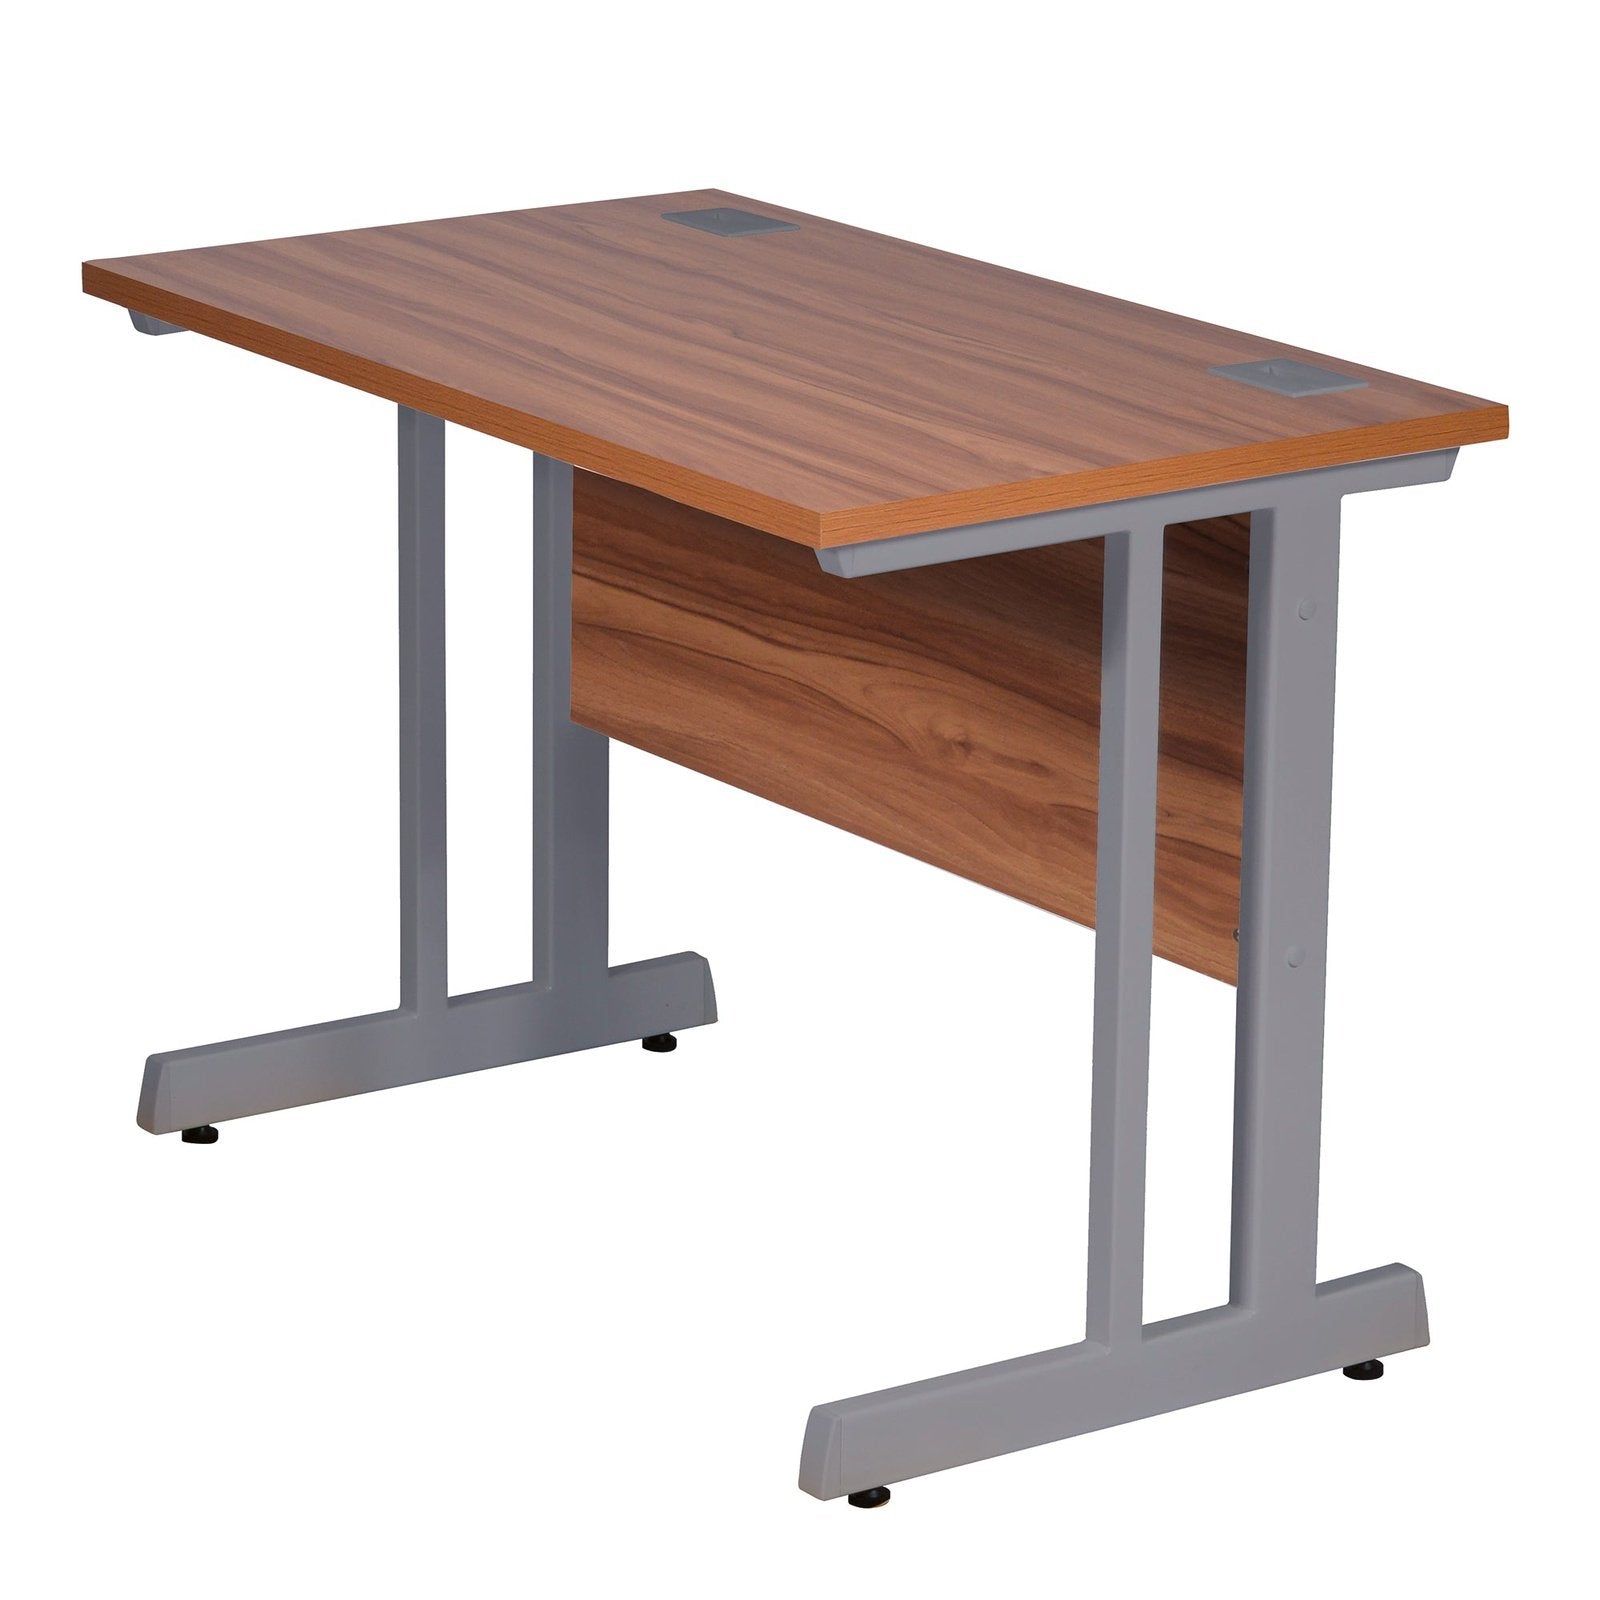 Rectangular Desk - 1400mm Wide with Cable Management & Modesty Panel - Office Products Online